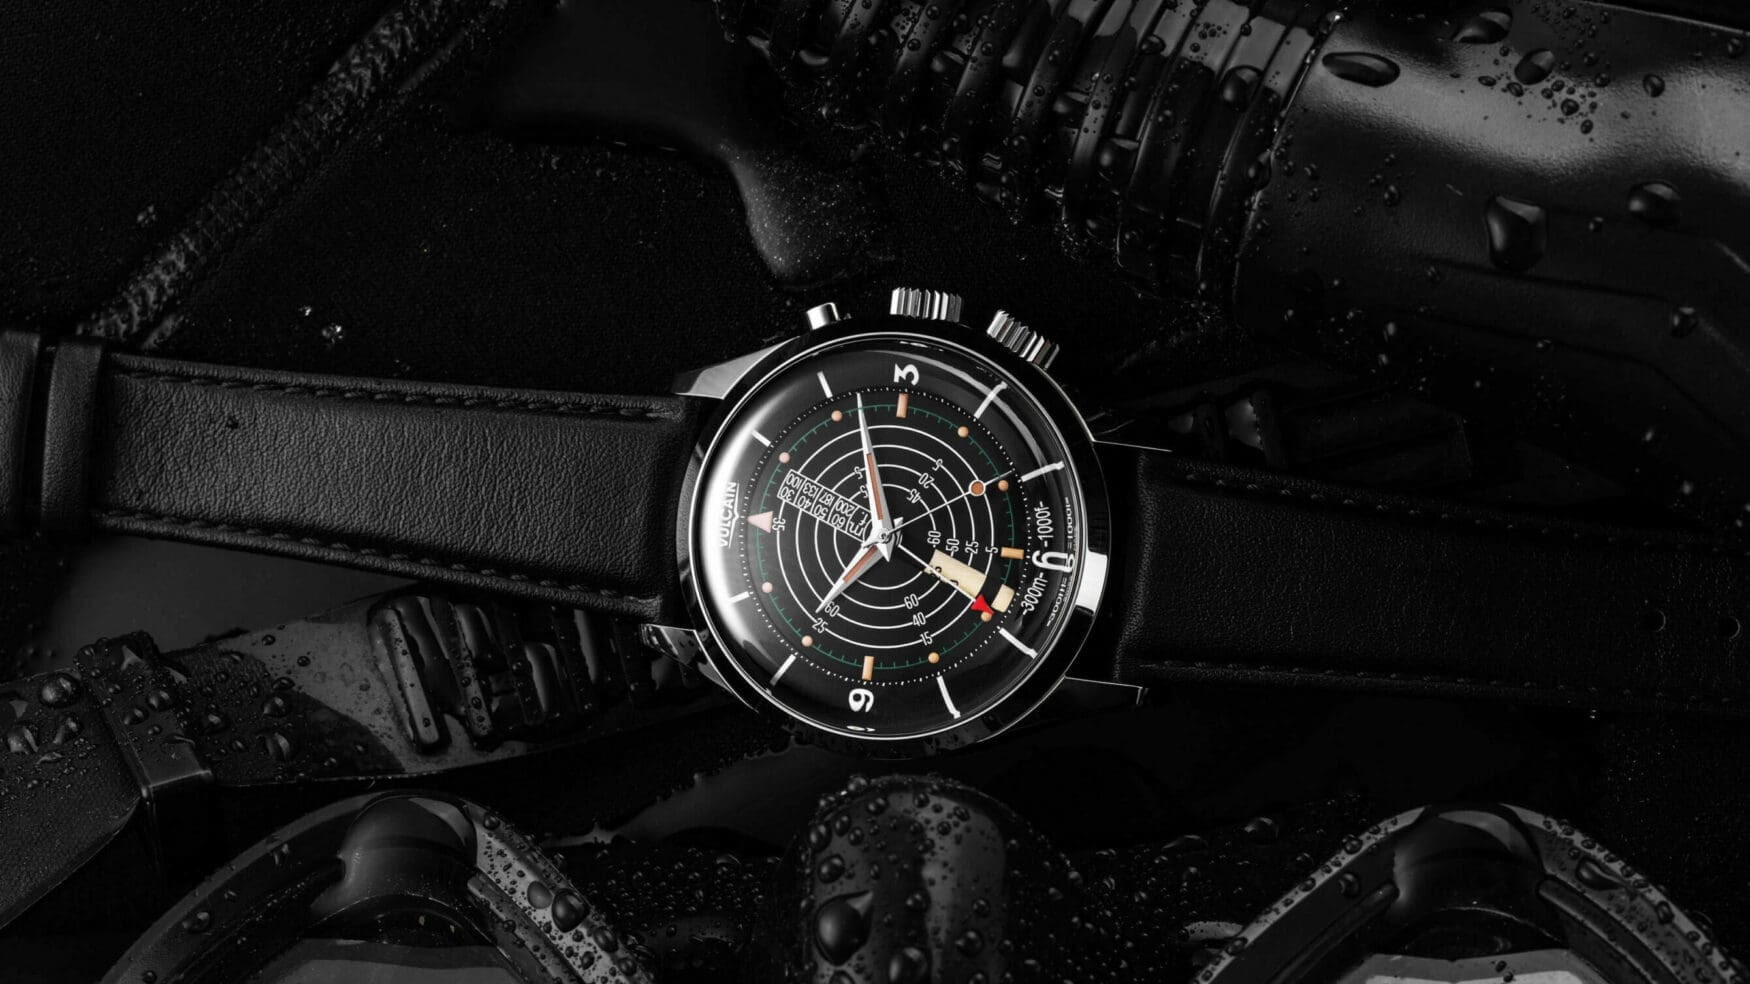 The Vulcain Cricket Nautical celebrates its 62nd birthday with a sapphire upgrade